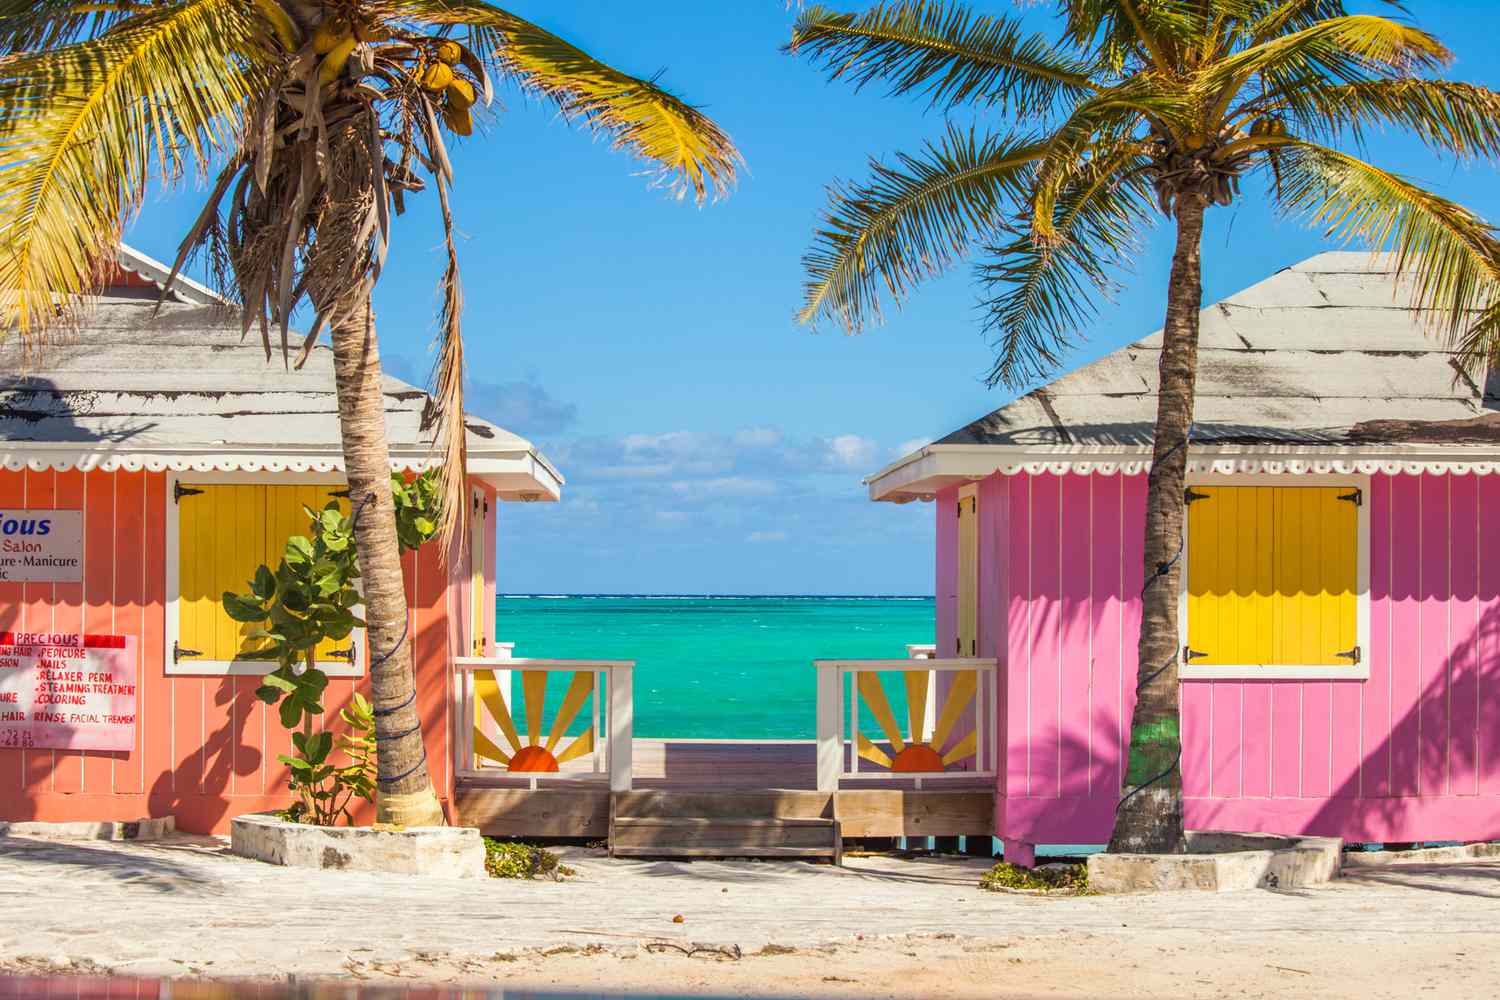 How to plan an unforgettable trip to turks and caicos including where to stay what to eat and things to do